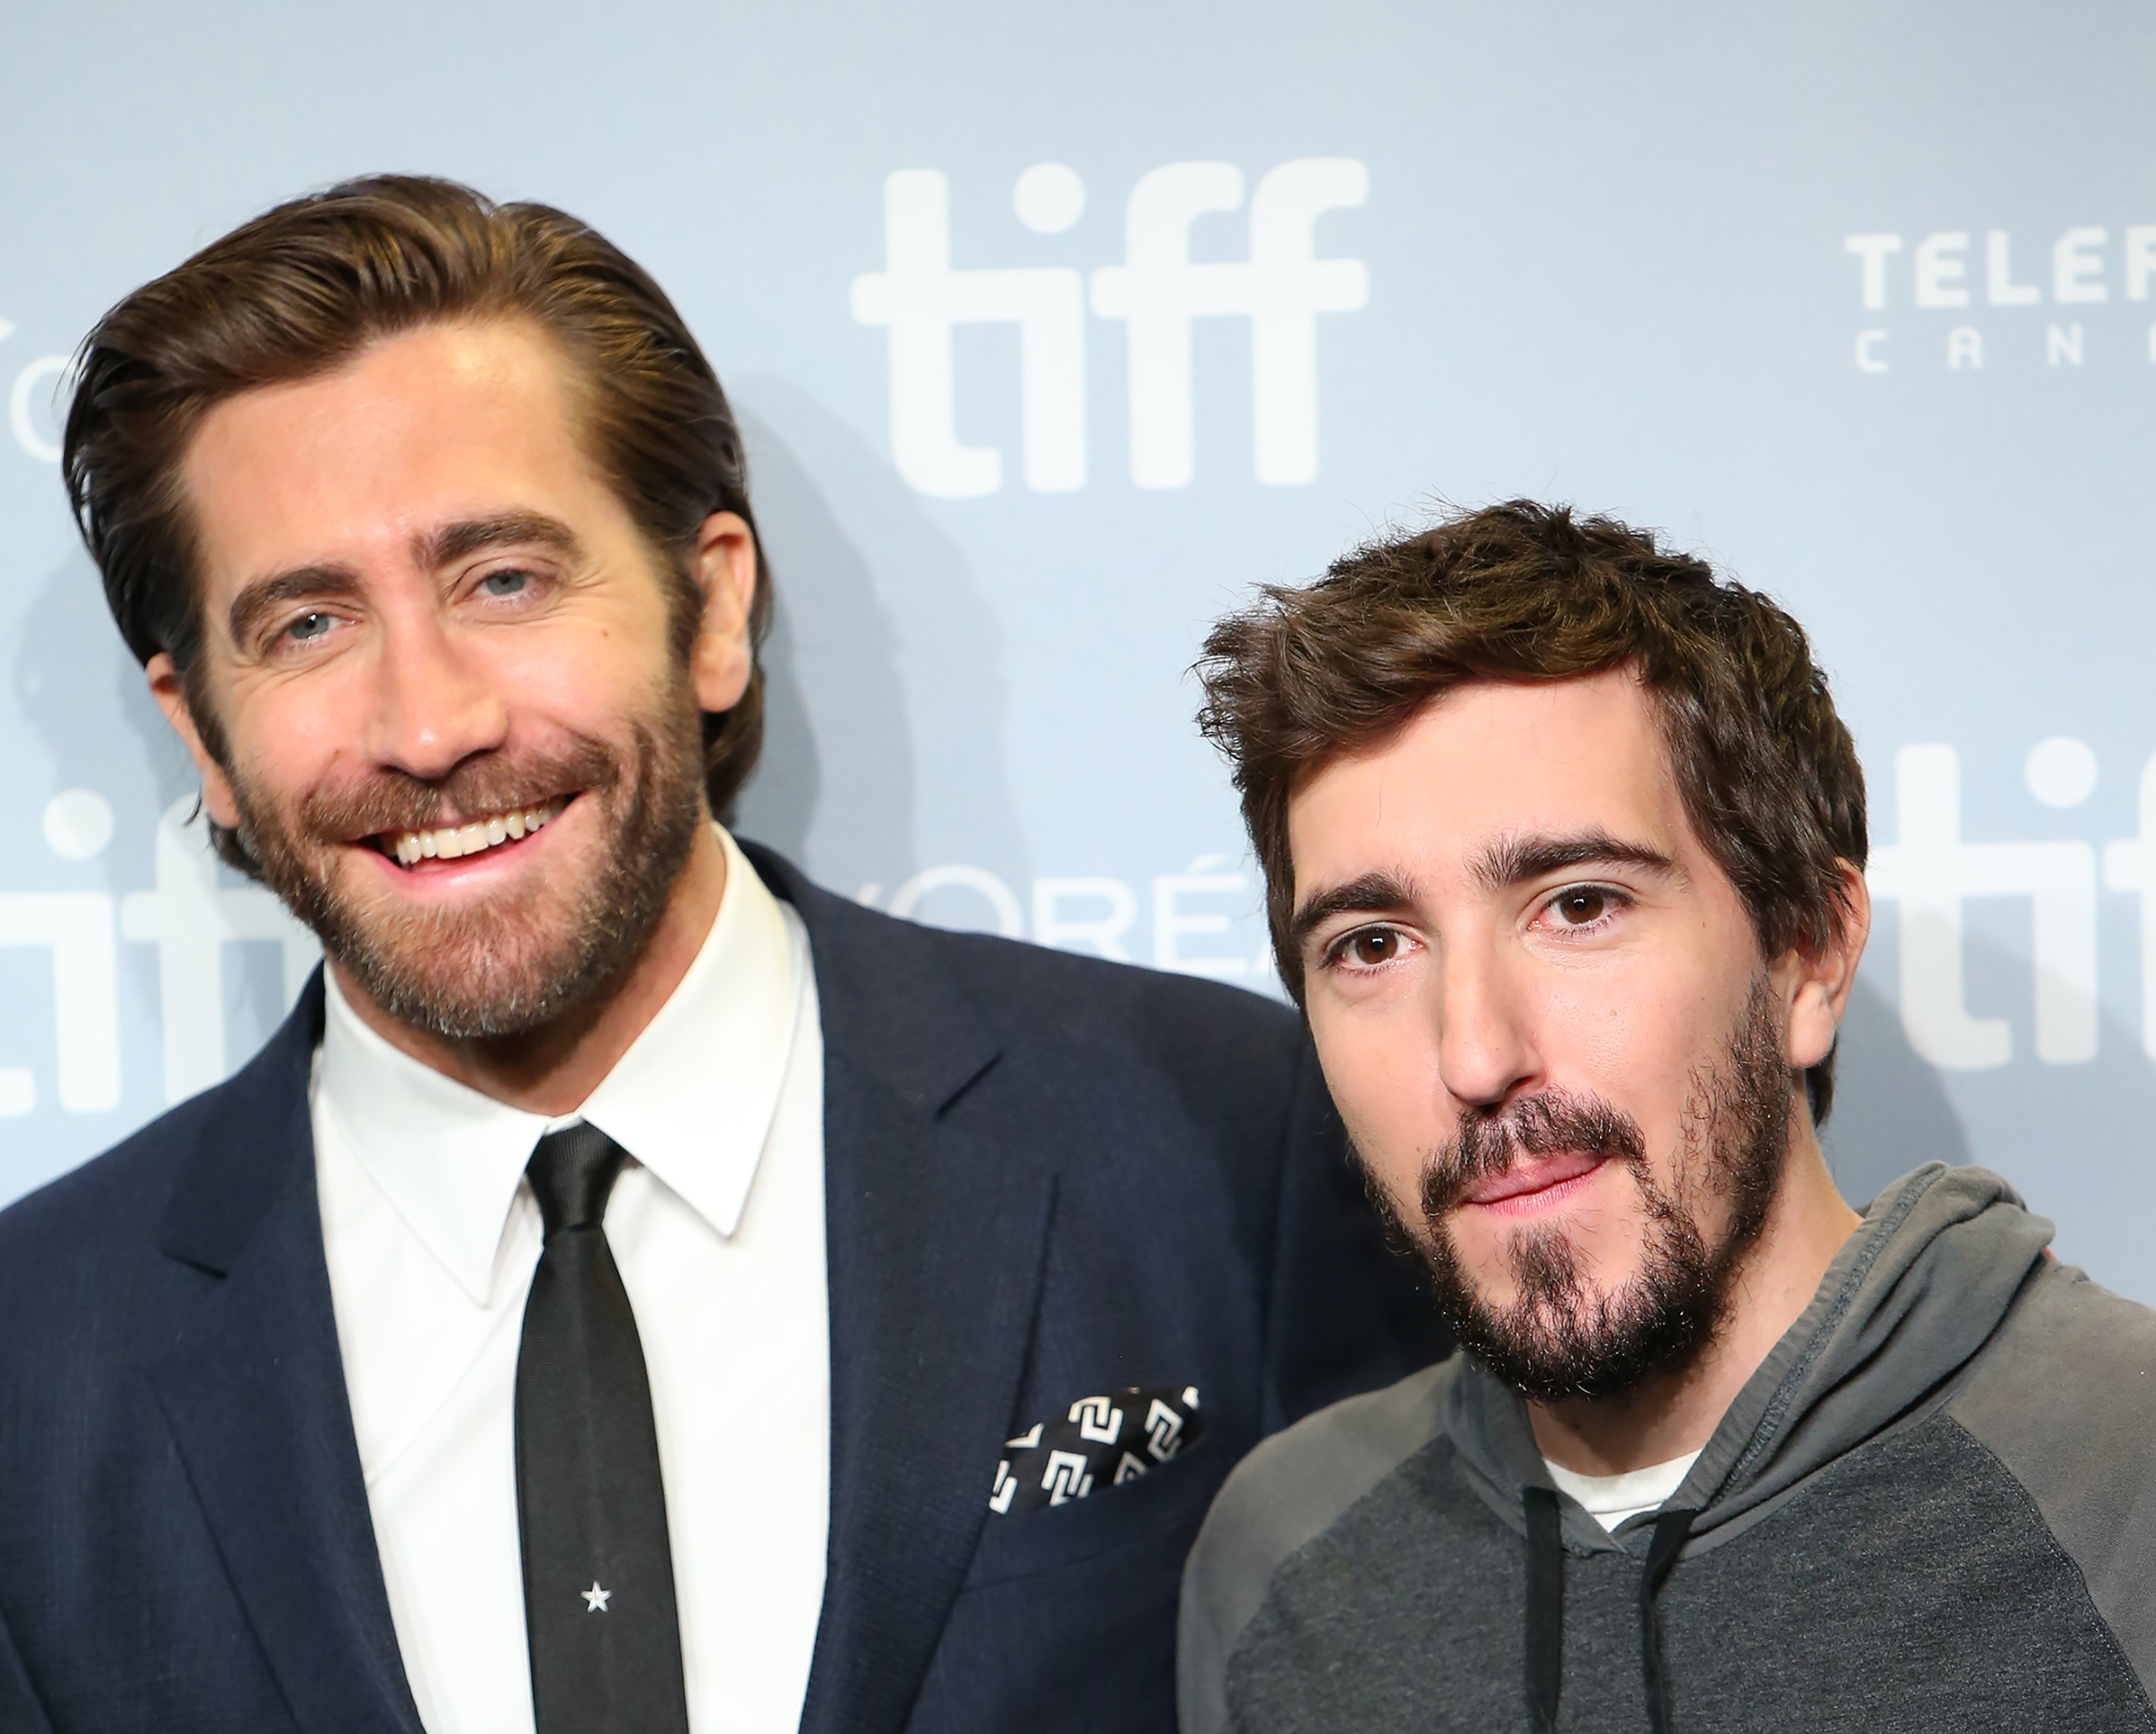 Jake Gyllenhaal and Jeff Bauman attend the 'Stronger' photo call during the 2017 Toronto International Film Festival at Tiff Bell Lightbox on September 9, 2017 in Toronto, Canada. (Walter McBride&mdash;FilmMagic/Getty Images)